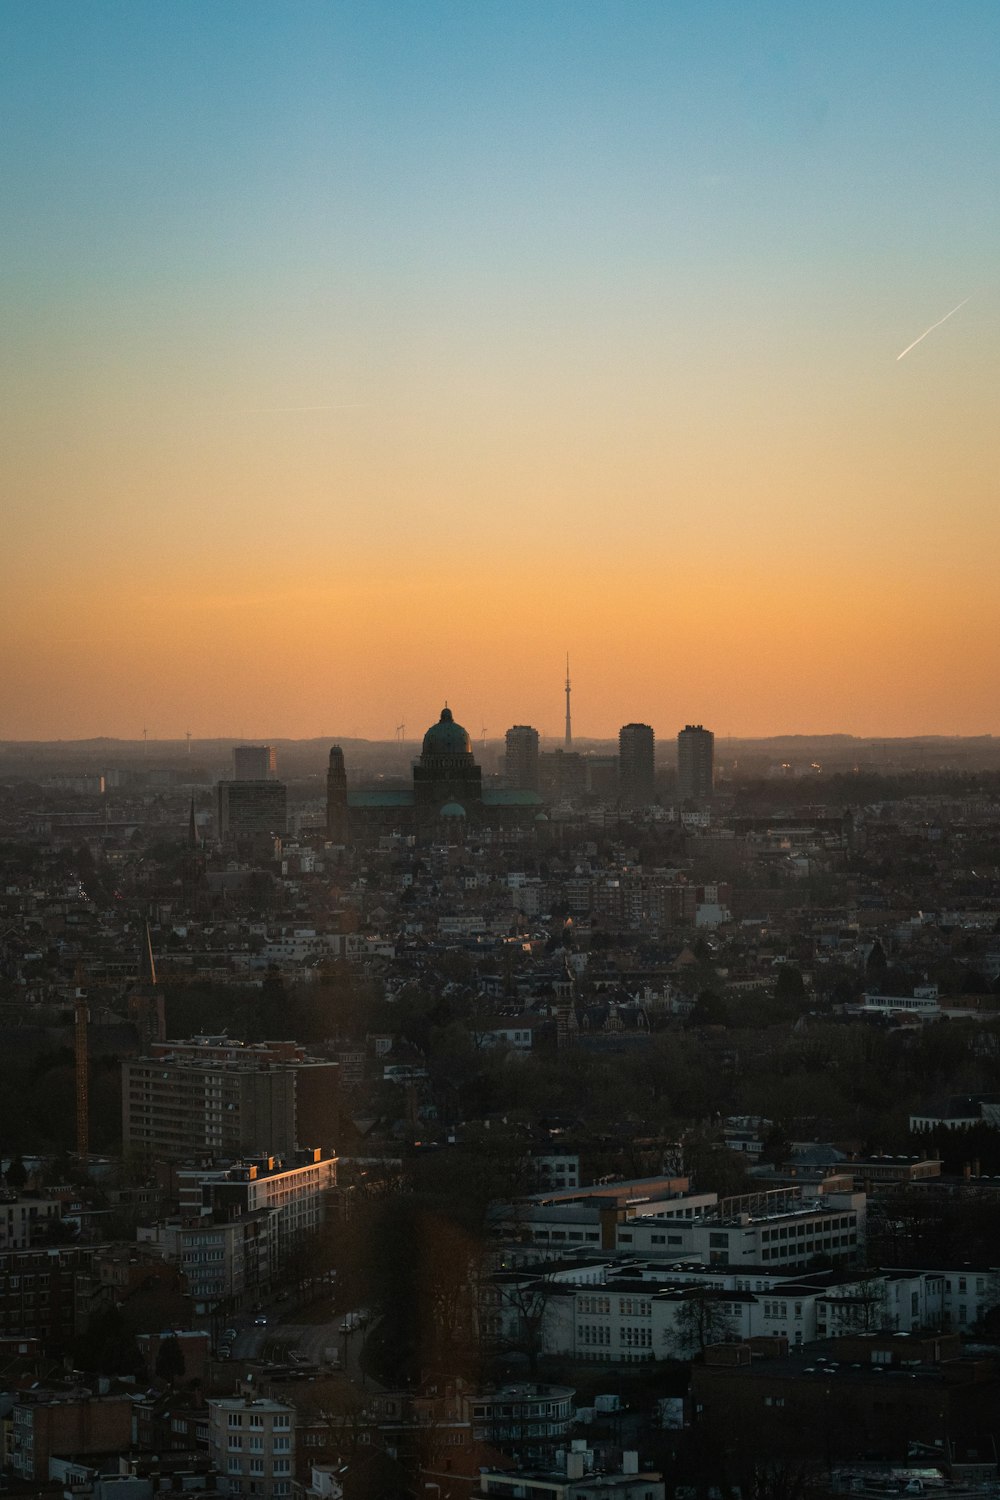 a view of a city at sunset from the top of a building